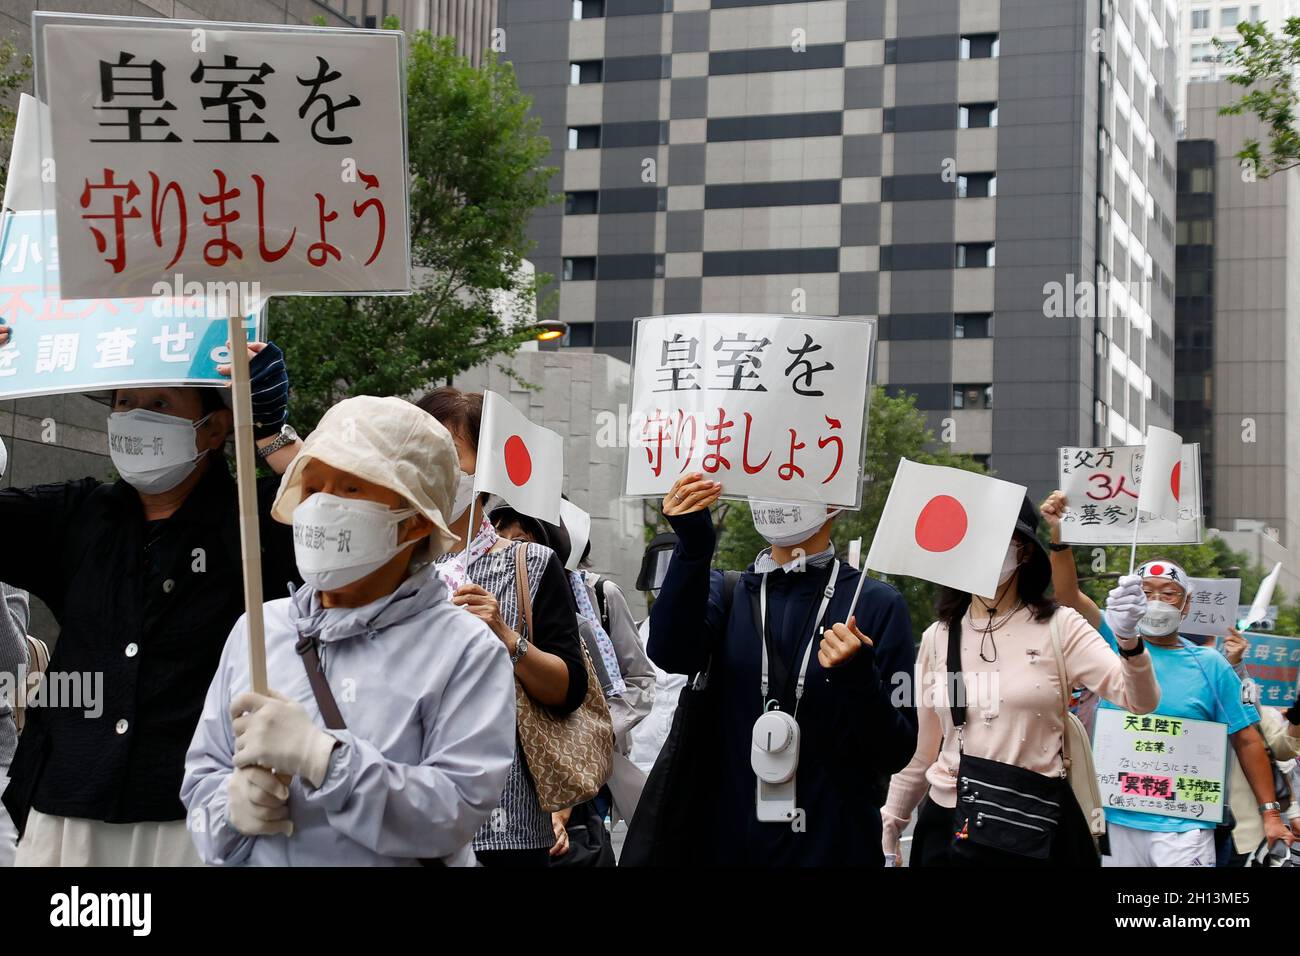 Tokyo, Japan. 16th Oct, 2021. Demonstrators holding placards rally against Princess Mako's marriage to her fianc Kei Komuro in downtown Tokyo on October 16, 2021, Tokyo, Japan. More than 100 demonstrators marched expressing doubts and objections to the wedding of Princess Mako and her fianc Kei Komuro, which is set to take place on October 26th. Credit: Rodrigo Reyes Marin/AFLO/Alamy Live News Credit: Aflo Co. Ltd./Alamy Live News Stock Photo